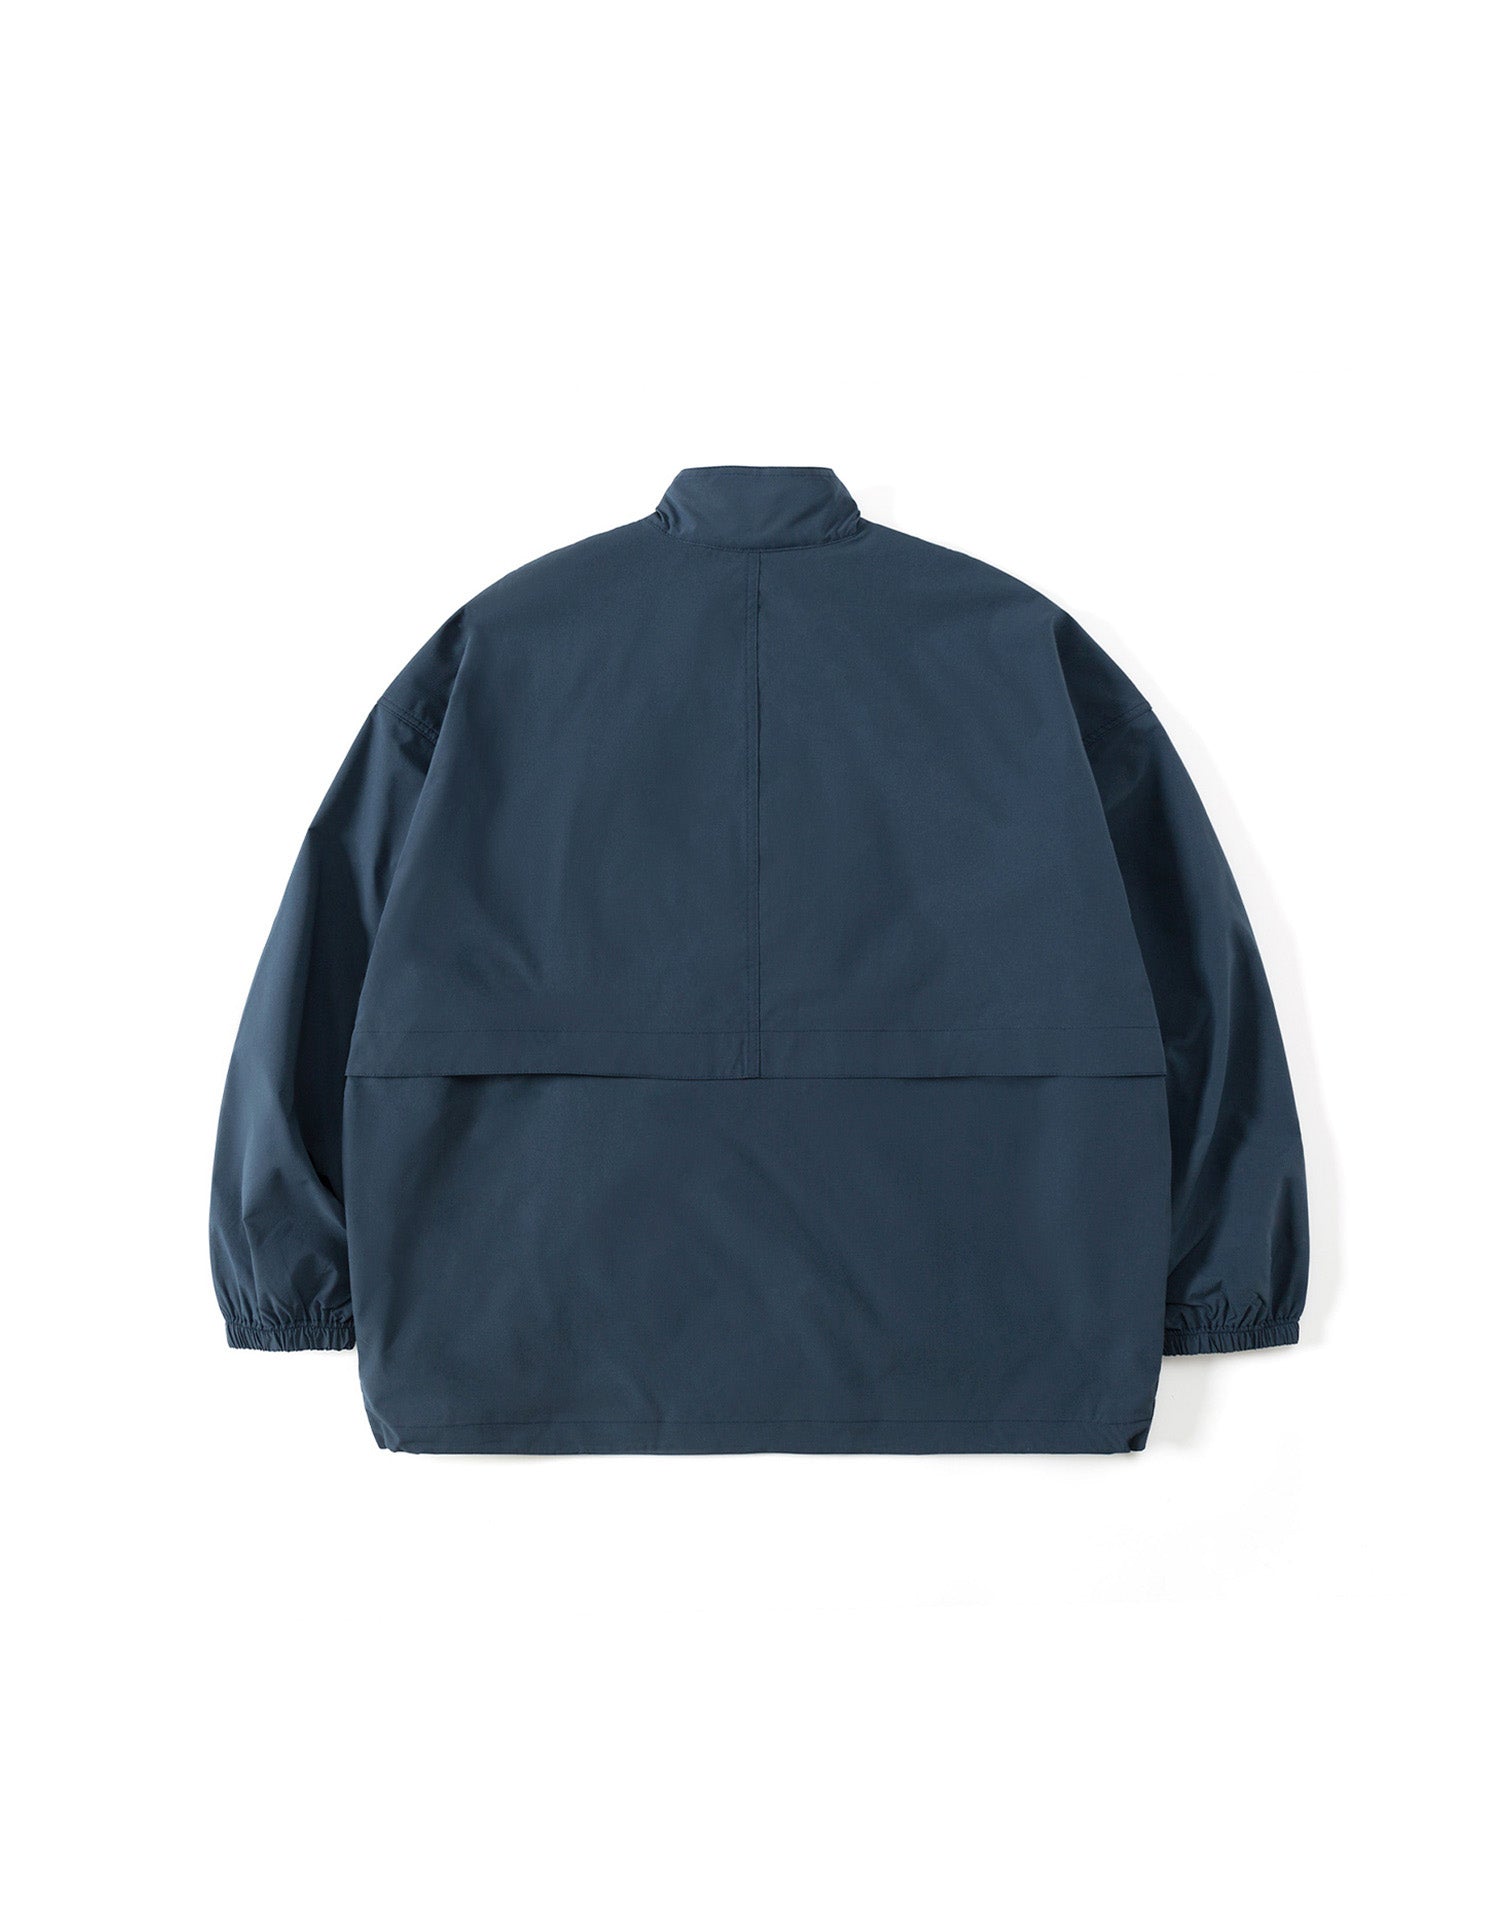 TopBasics 3 in 1 Two Pockets Pullover Jacket